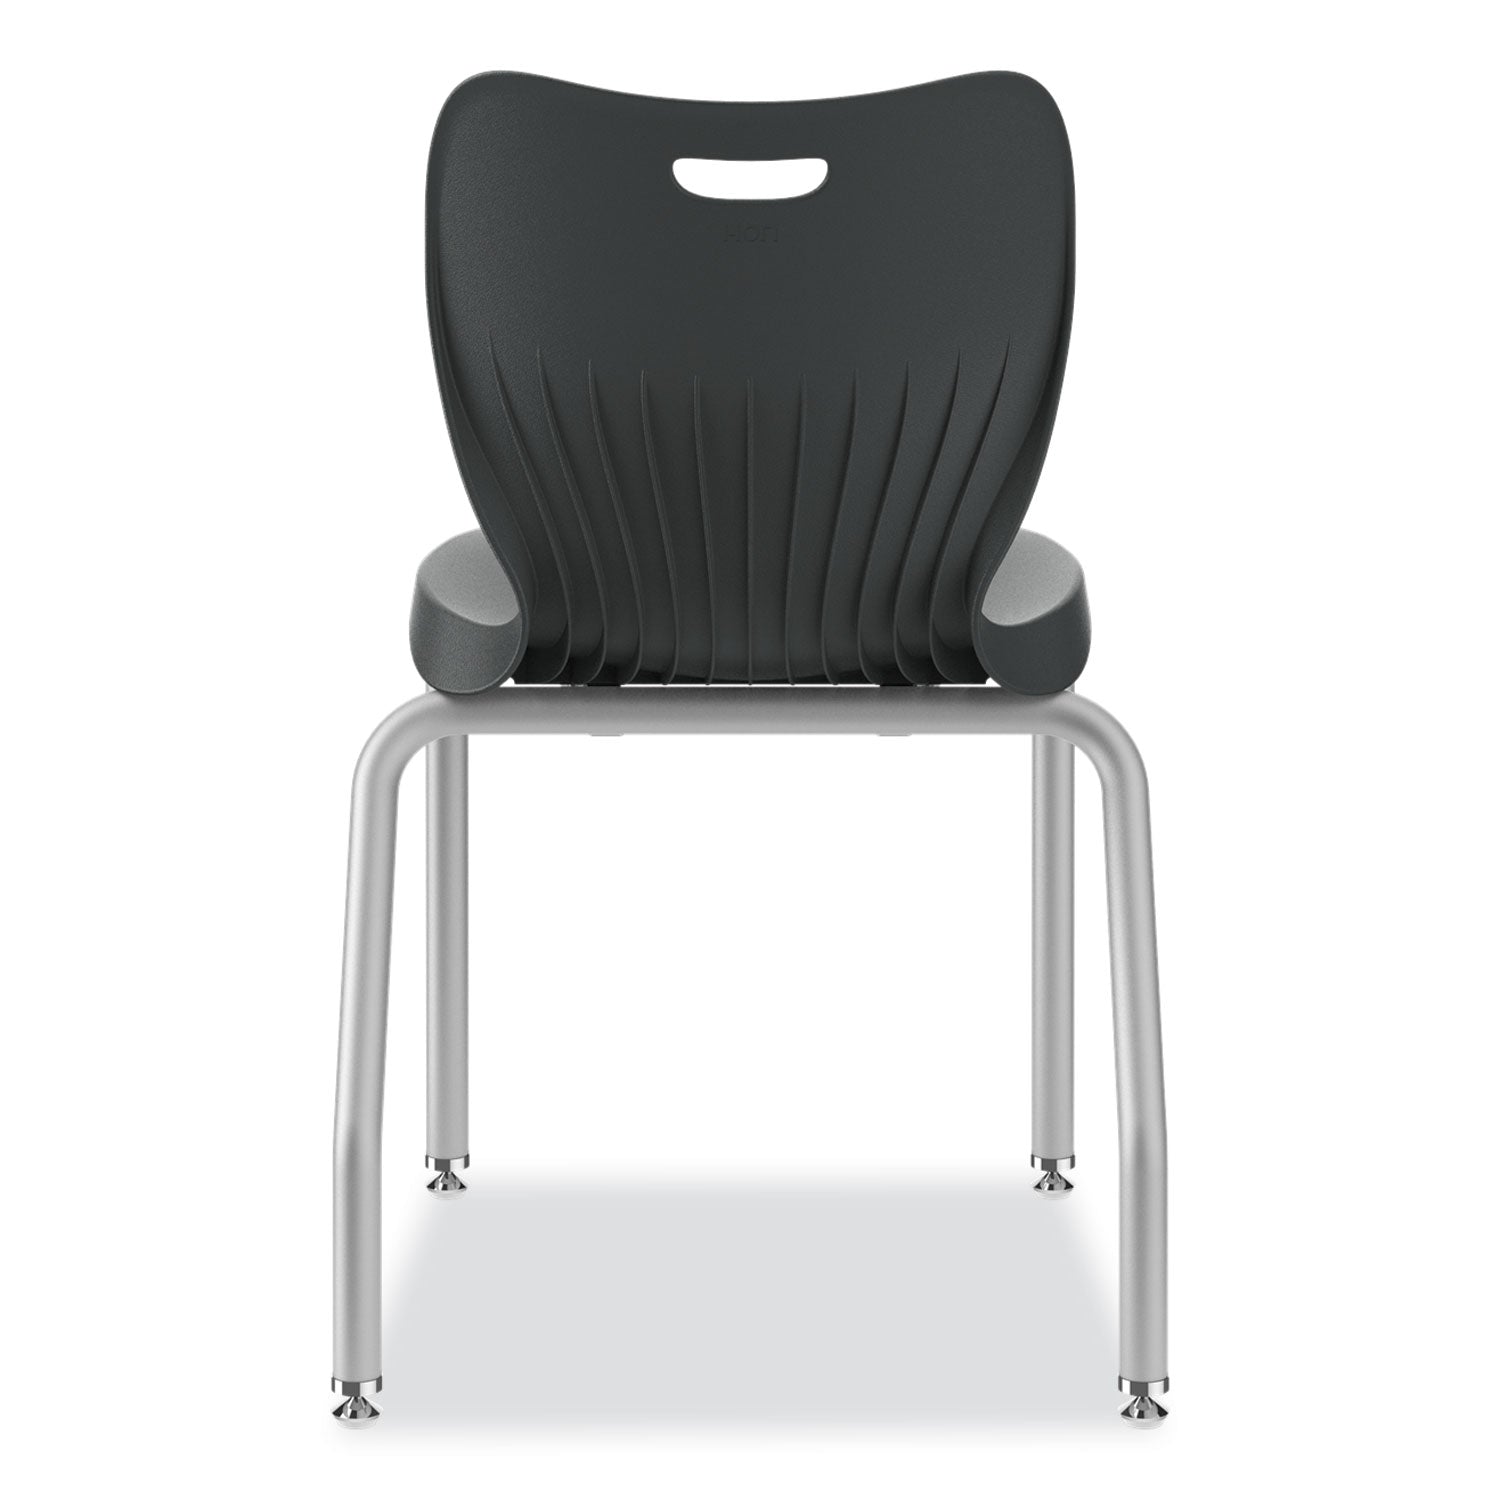 smartlink-four-leg-chair-supports-up-to-275-lb-18-seat-height-lava-seat-back-platinum-base-ships-in-7-10-business-days_honsl4l18elap - 3